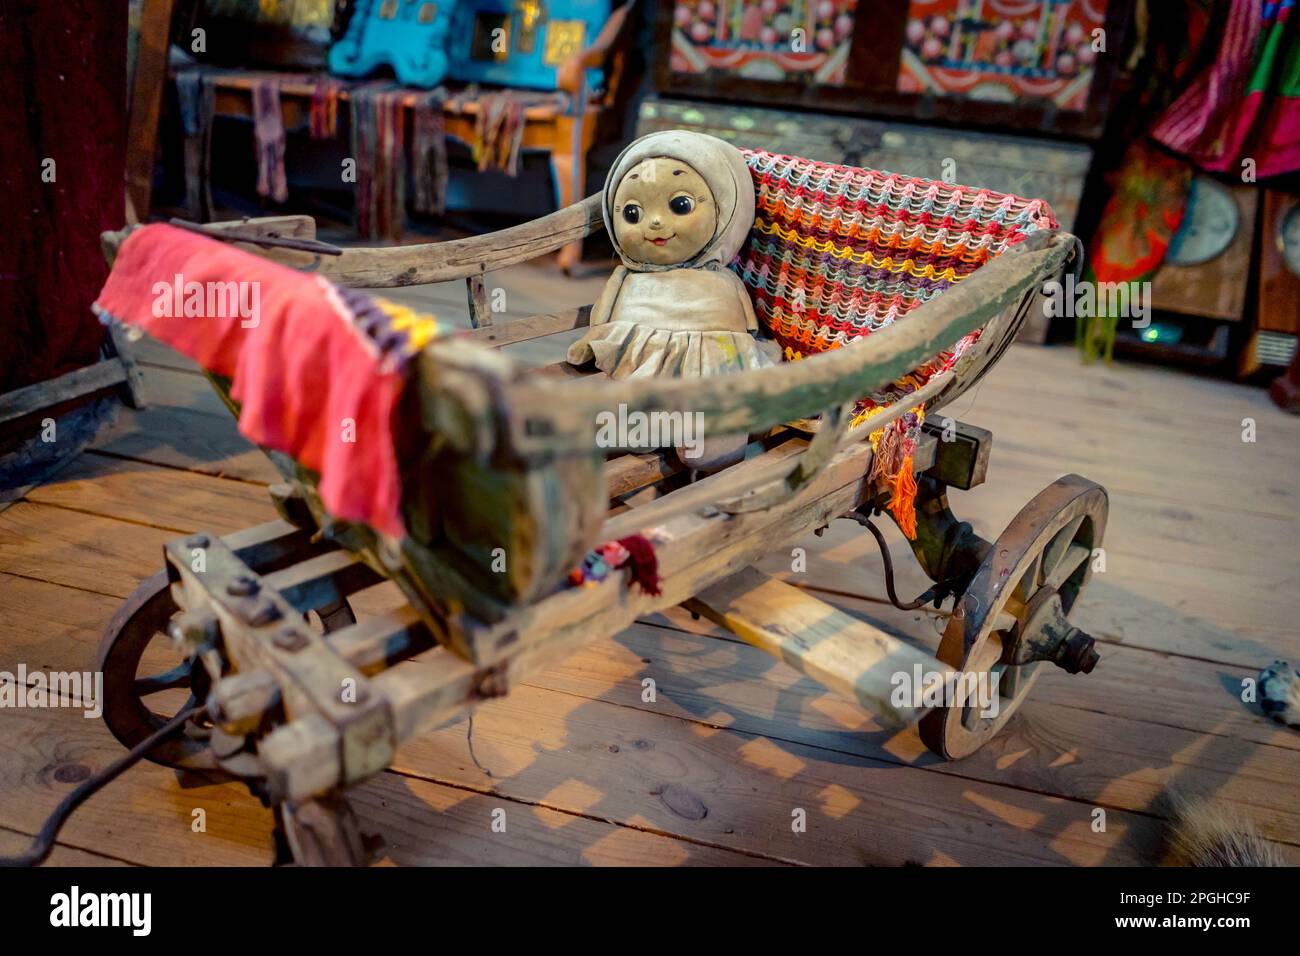 Creepy baby girl doll in a cradle on wheels Stock Photo